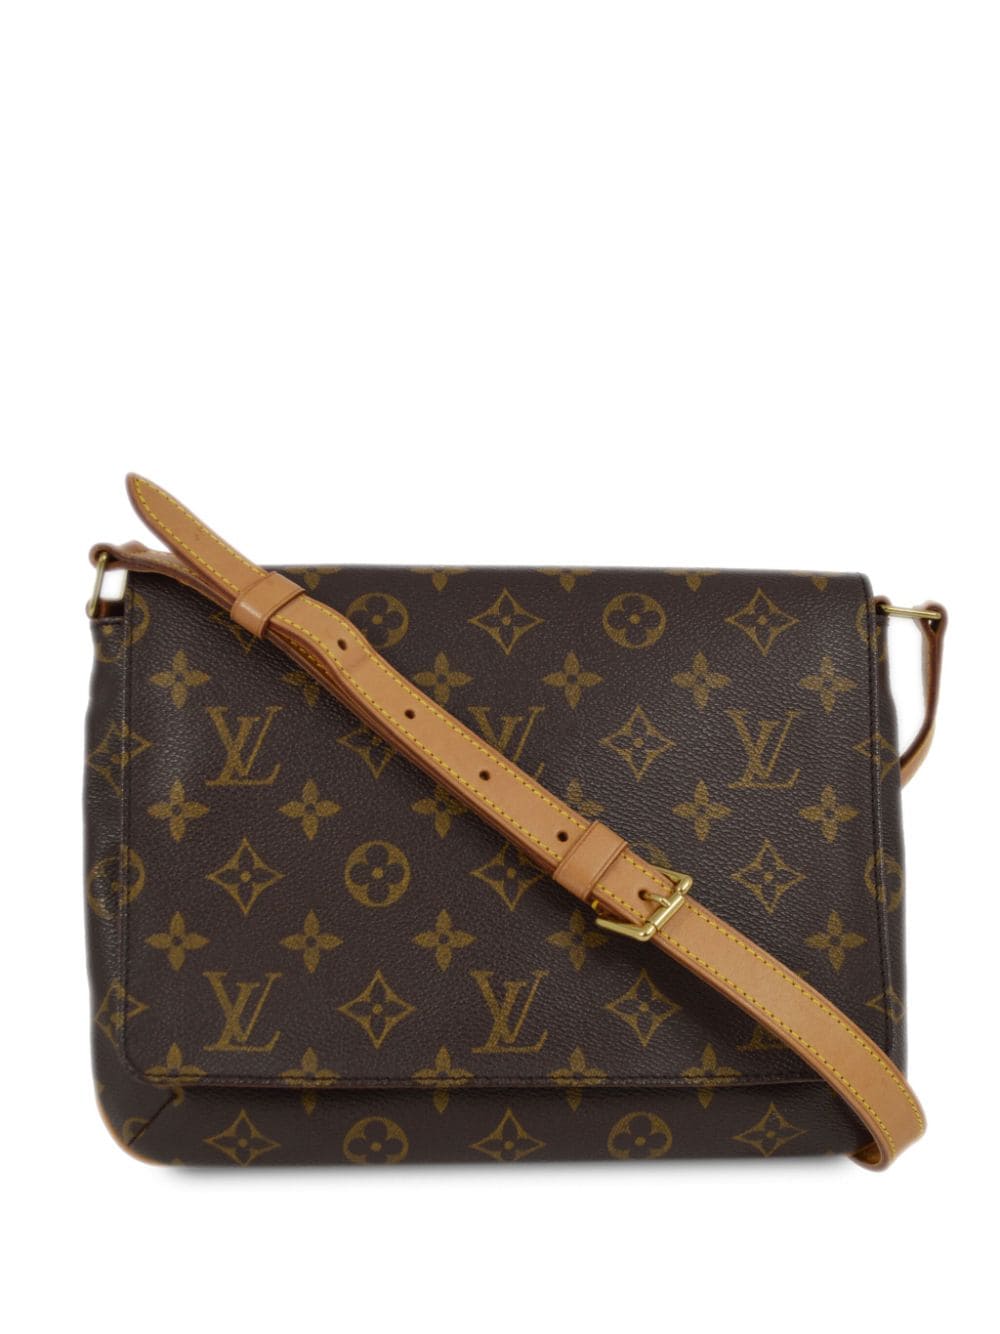 Pre-owned Louis Vuitton 2001 Musette Tango Shoulder Bag In Brown